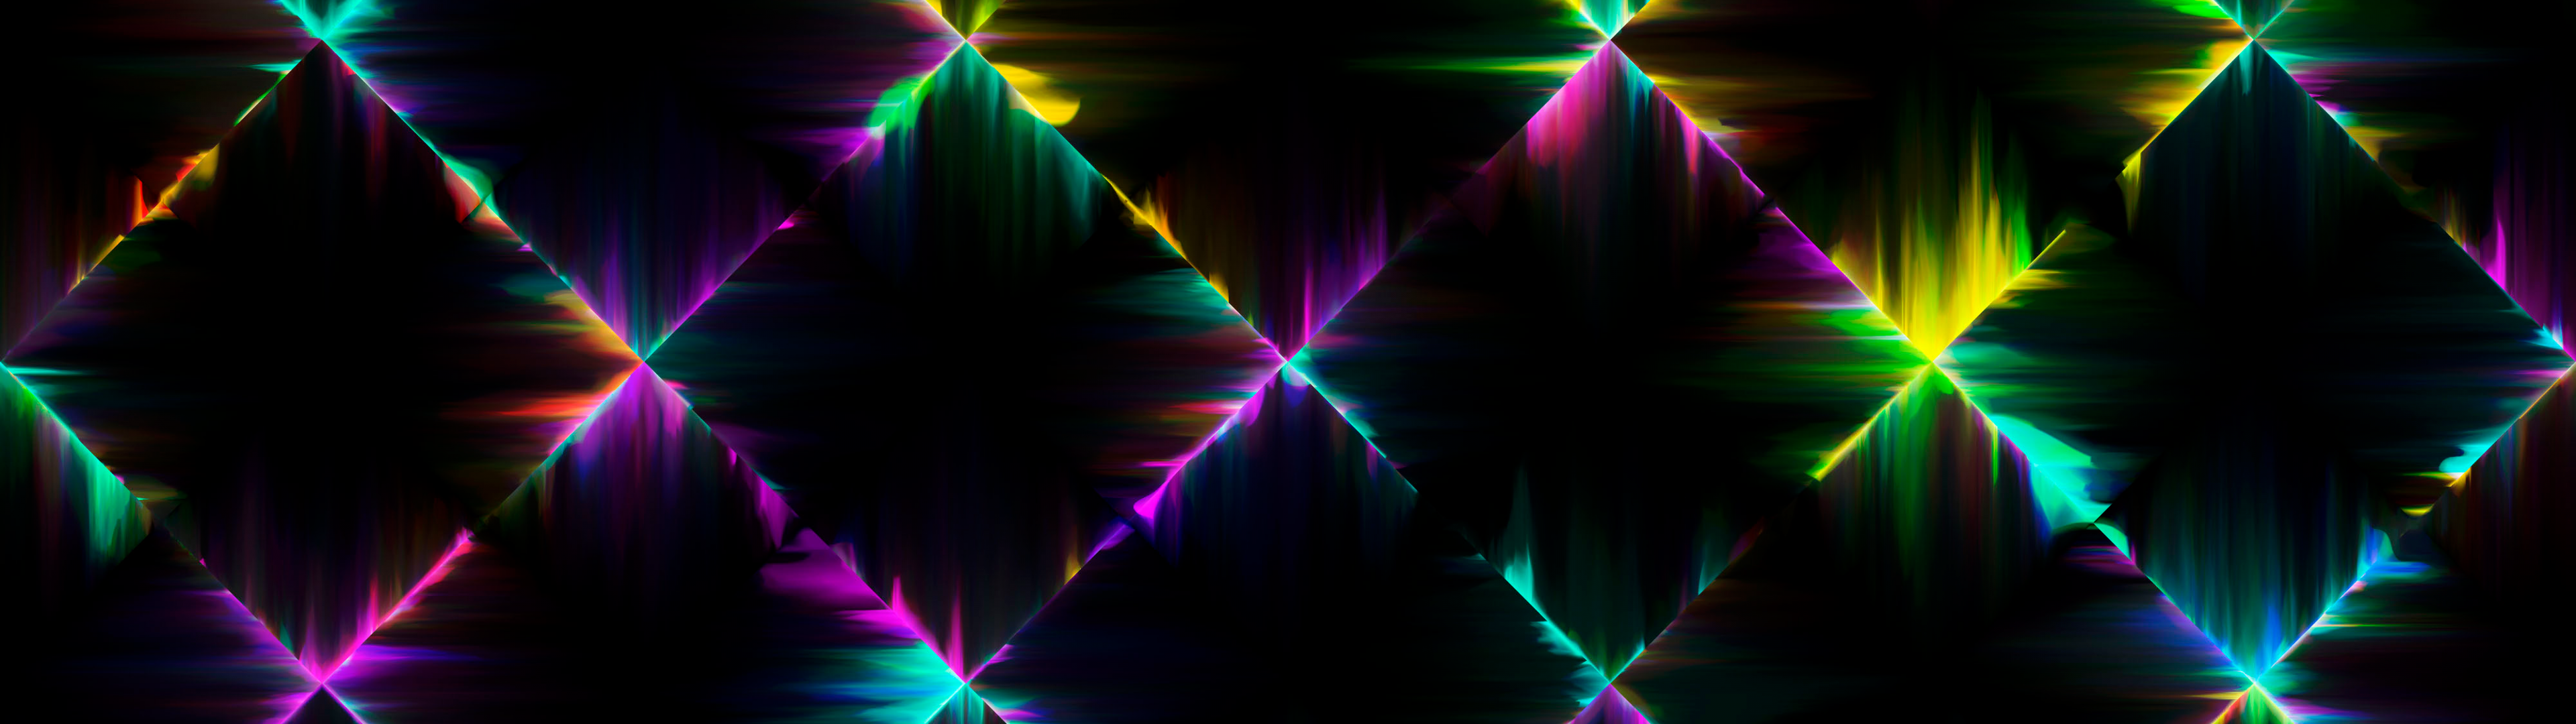 Neon Lights Wallpaper 4K, Colorful, Abstract, #1